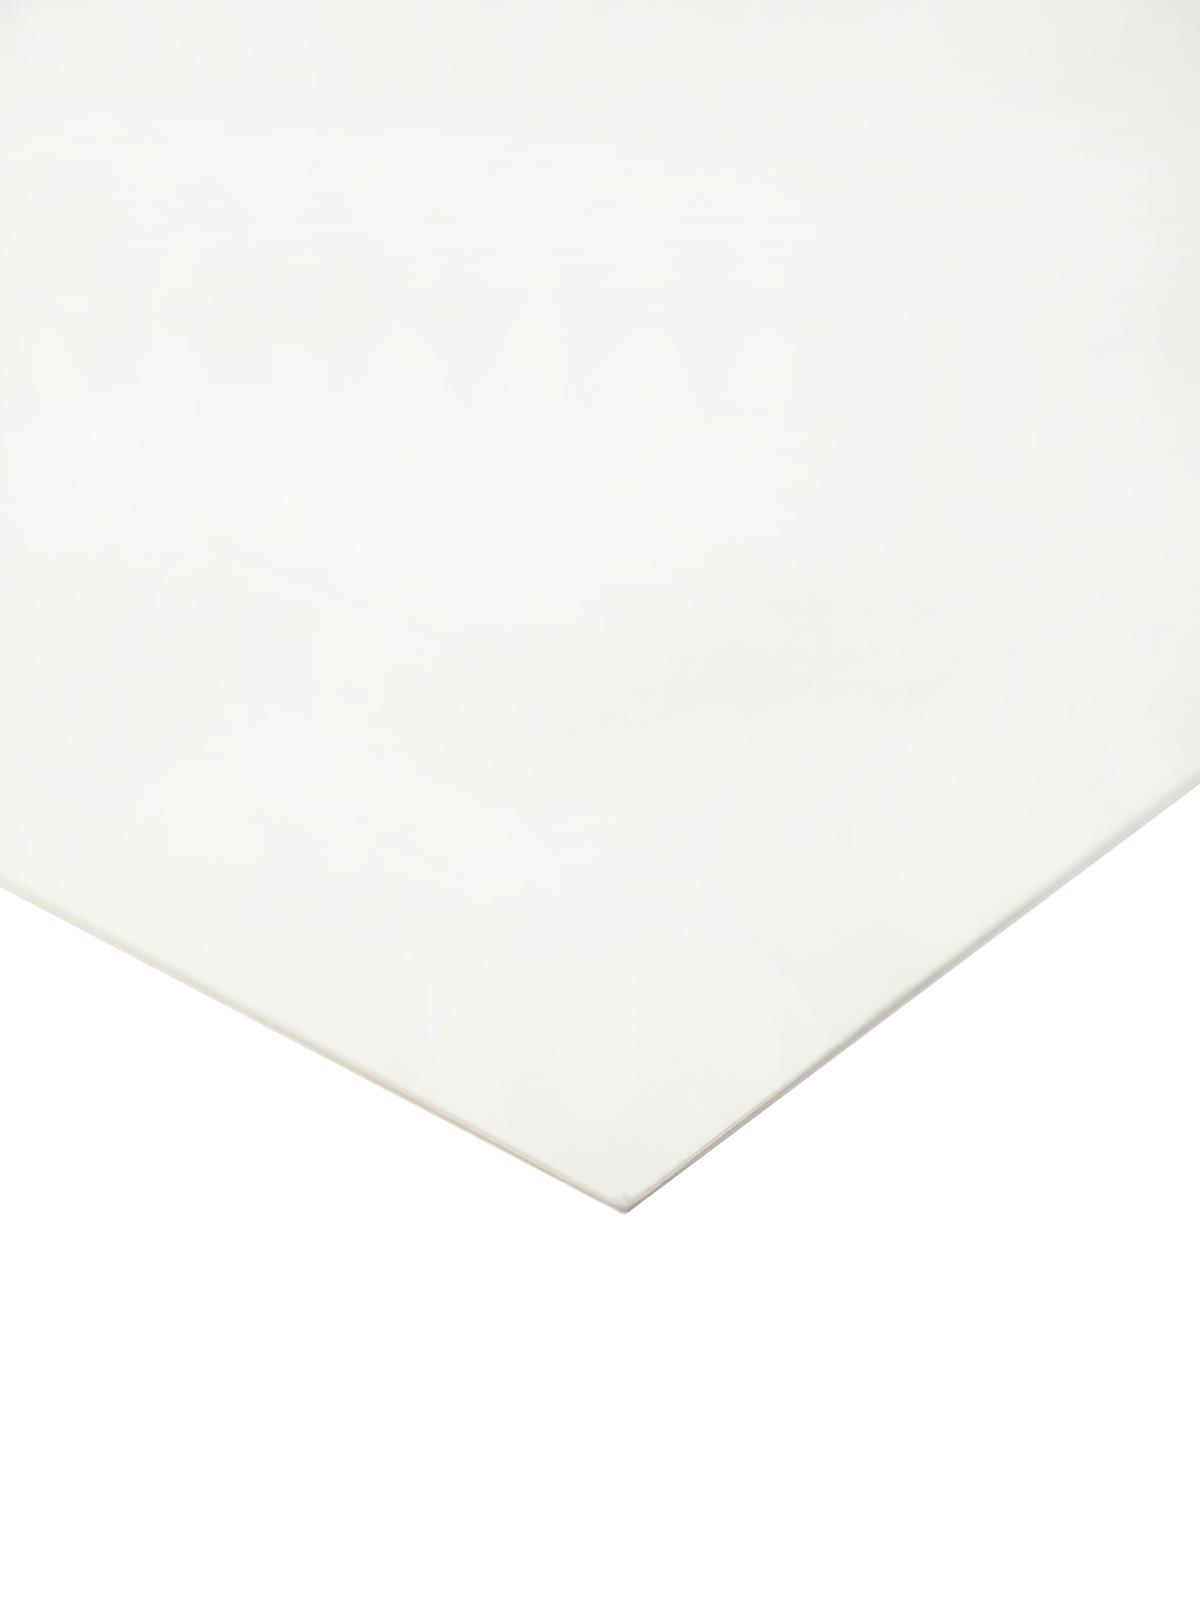 Museum Mounting Board Acid Free Natural 2 Ply Each